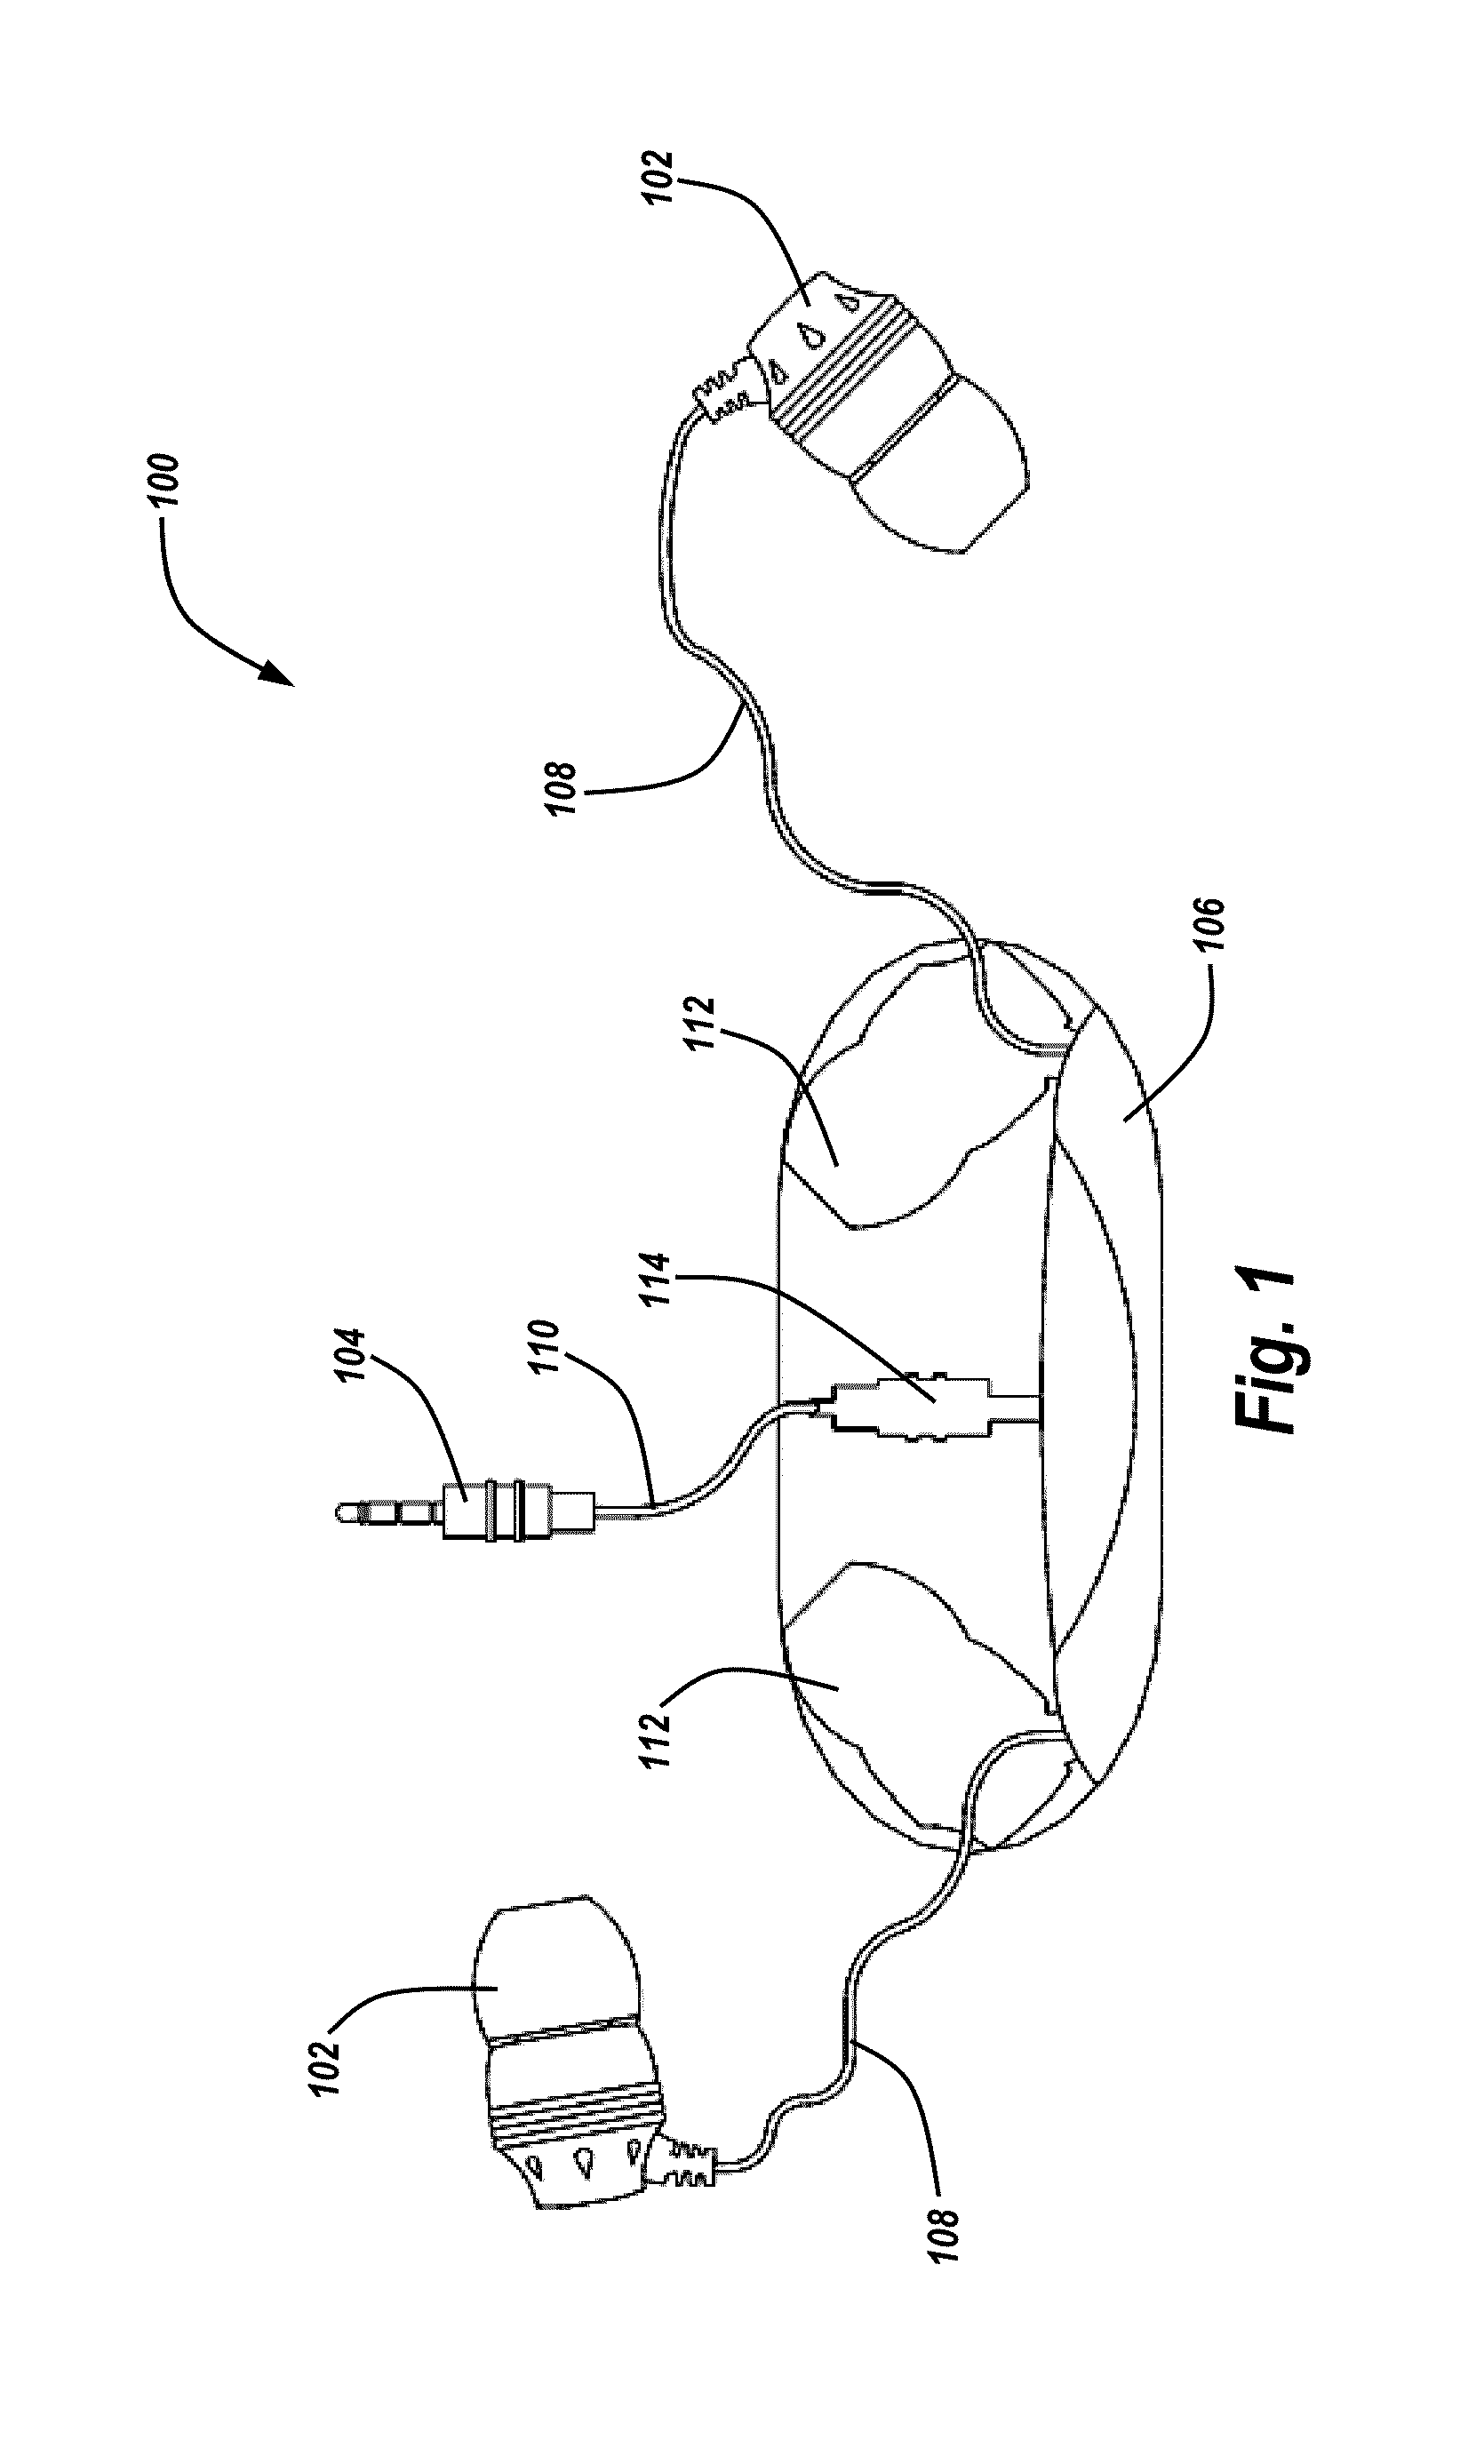 Audio docking devices and systems